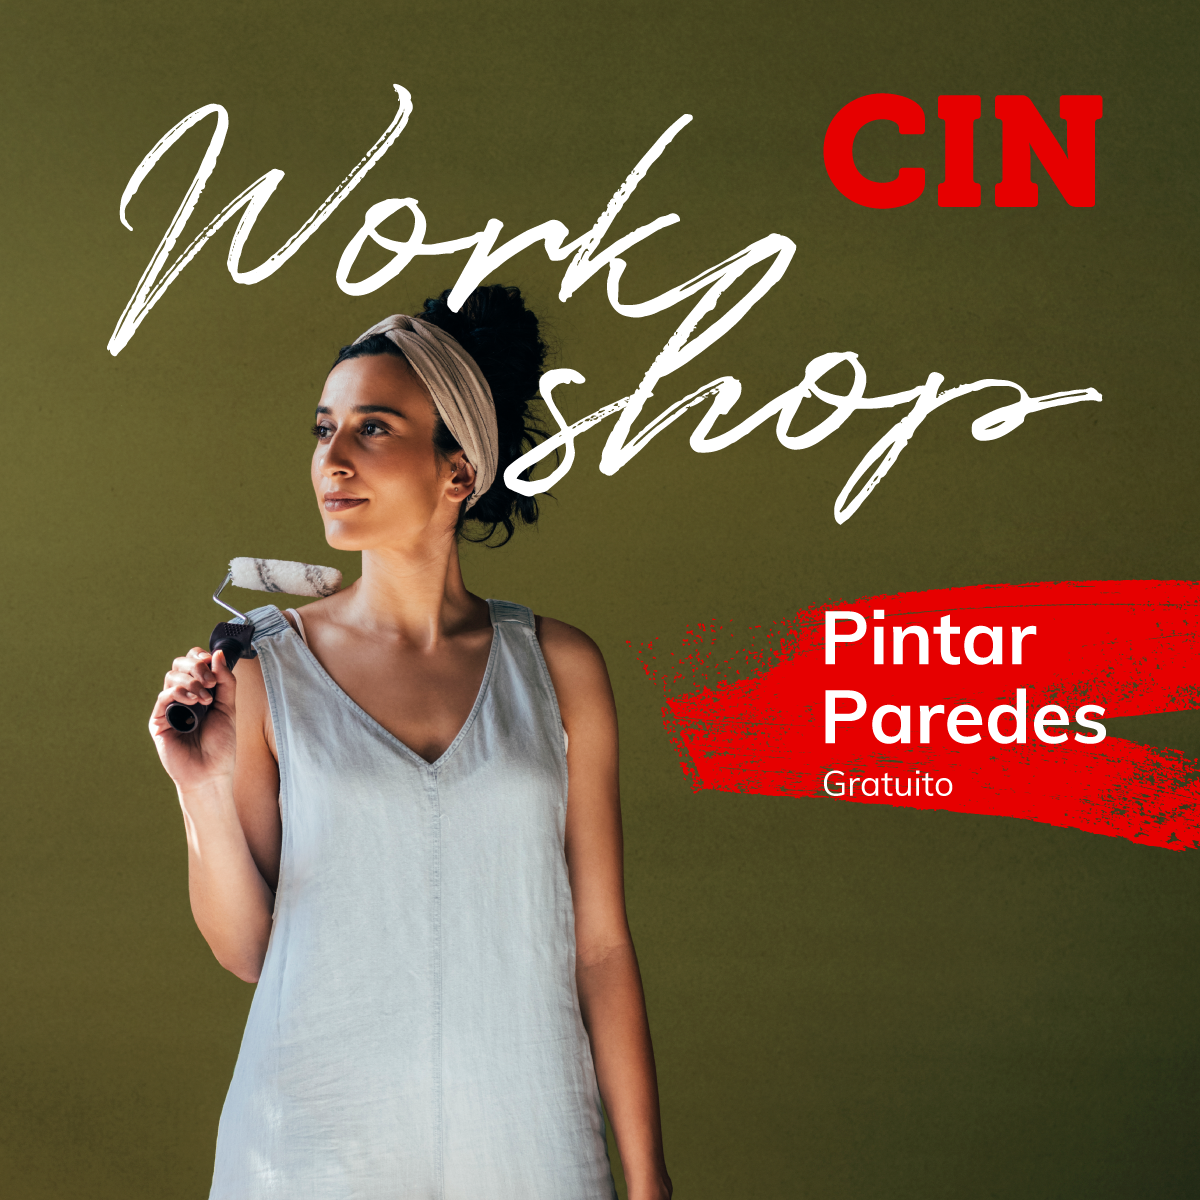 Free CIN workshops return to teach simple painting and decorating techniques